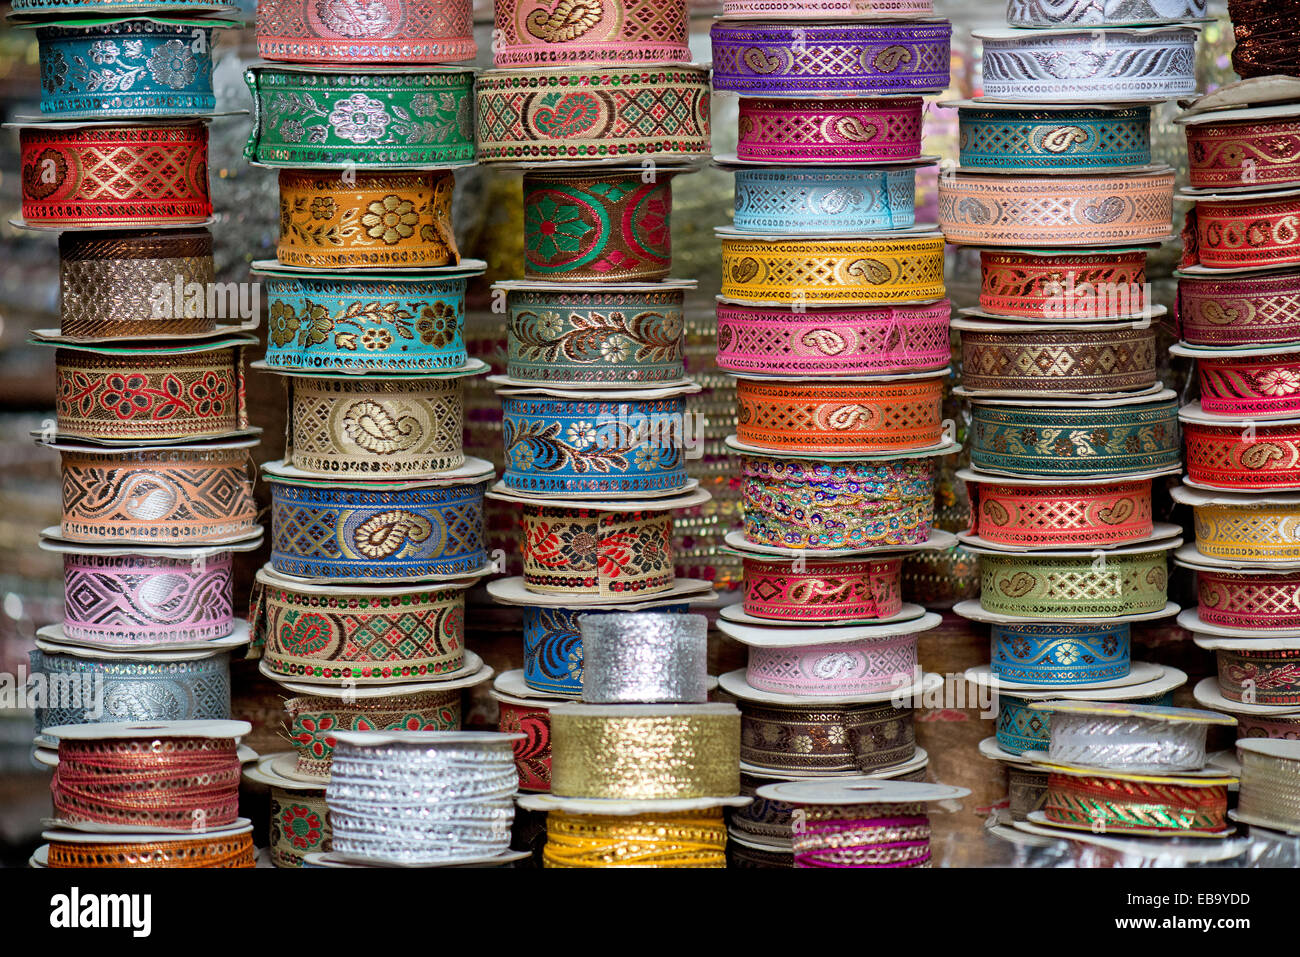 Rolls with embroidered gift ribbons, Jodhpur, Rajasthan, India Stock Photo